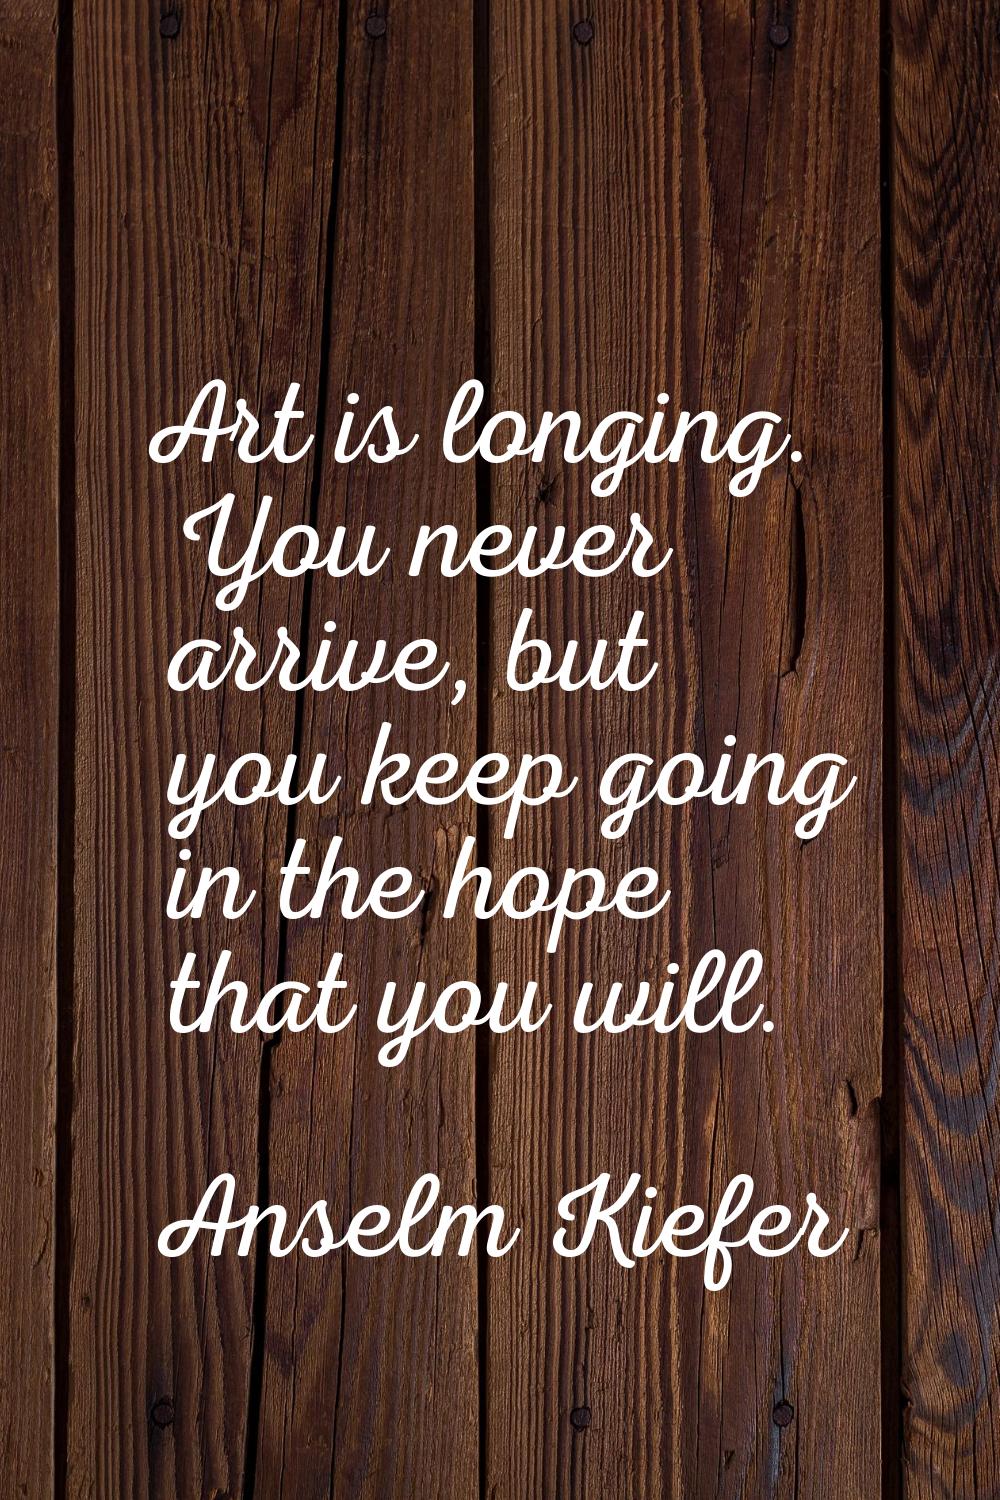 Art is longing. You never arrive, but you keep going in the hope that you will.